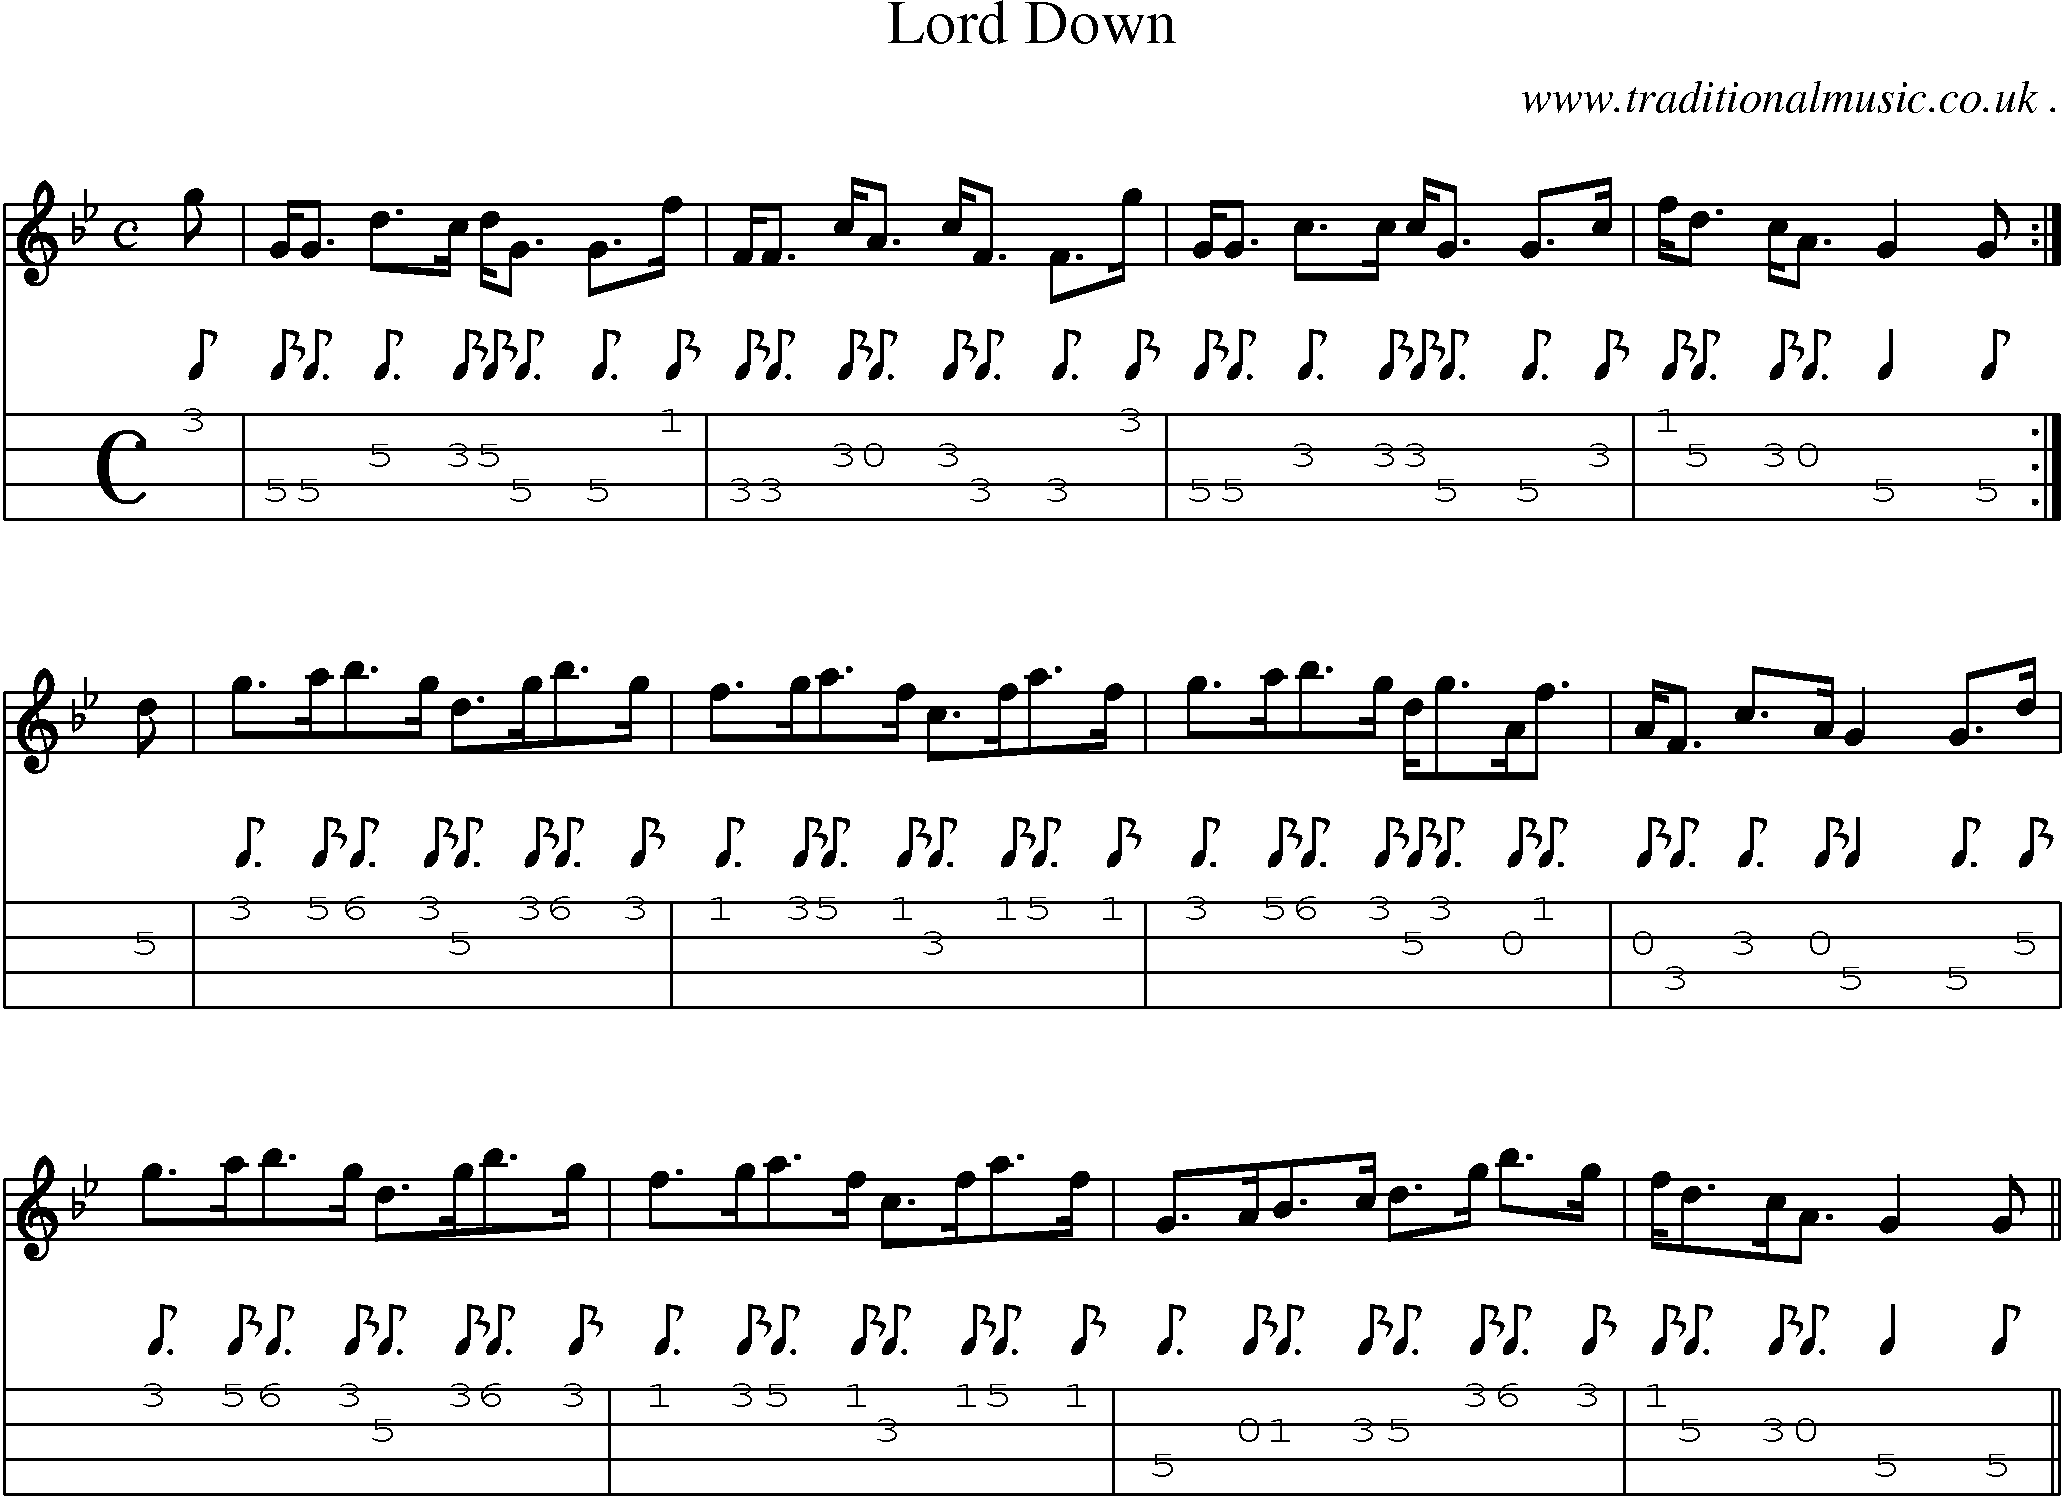 Sheet-music  score, Chords and Mandolin Tabs for Lord Down